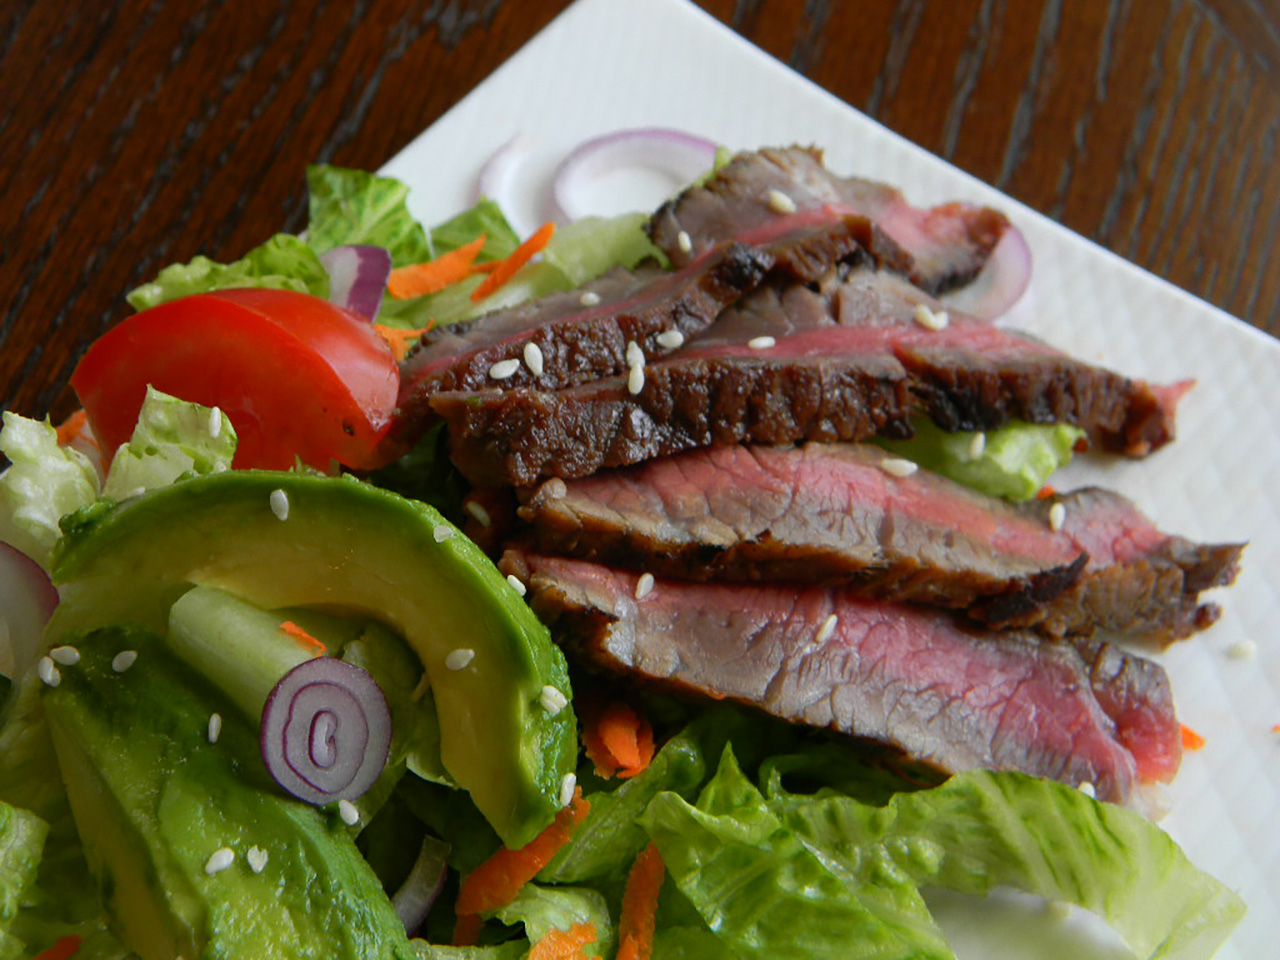 Grilled Steak Salad with Asian Dressing